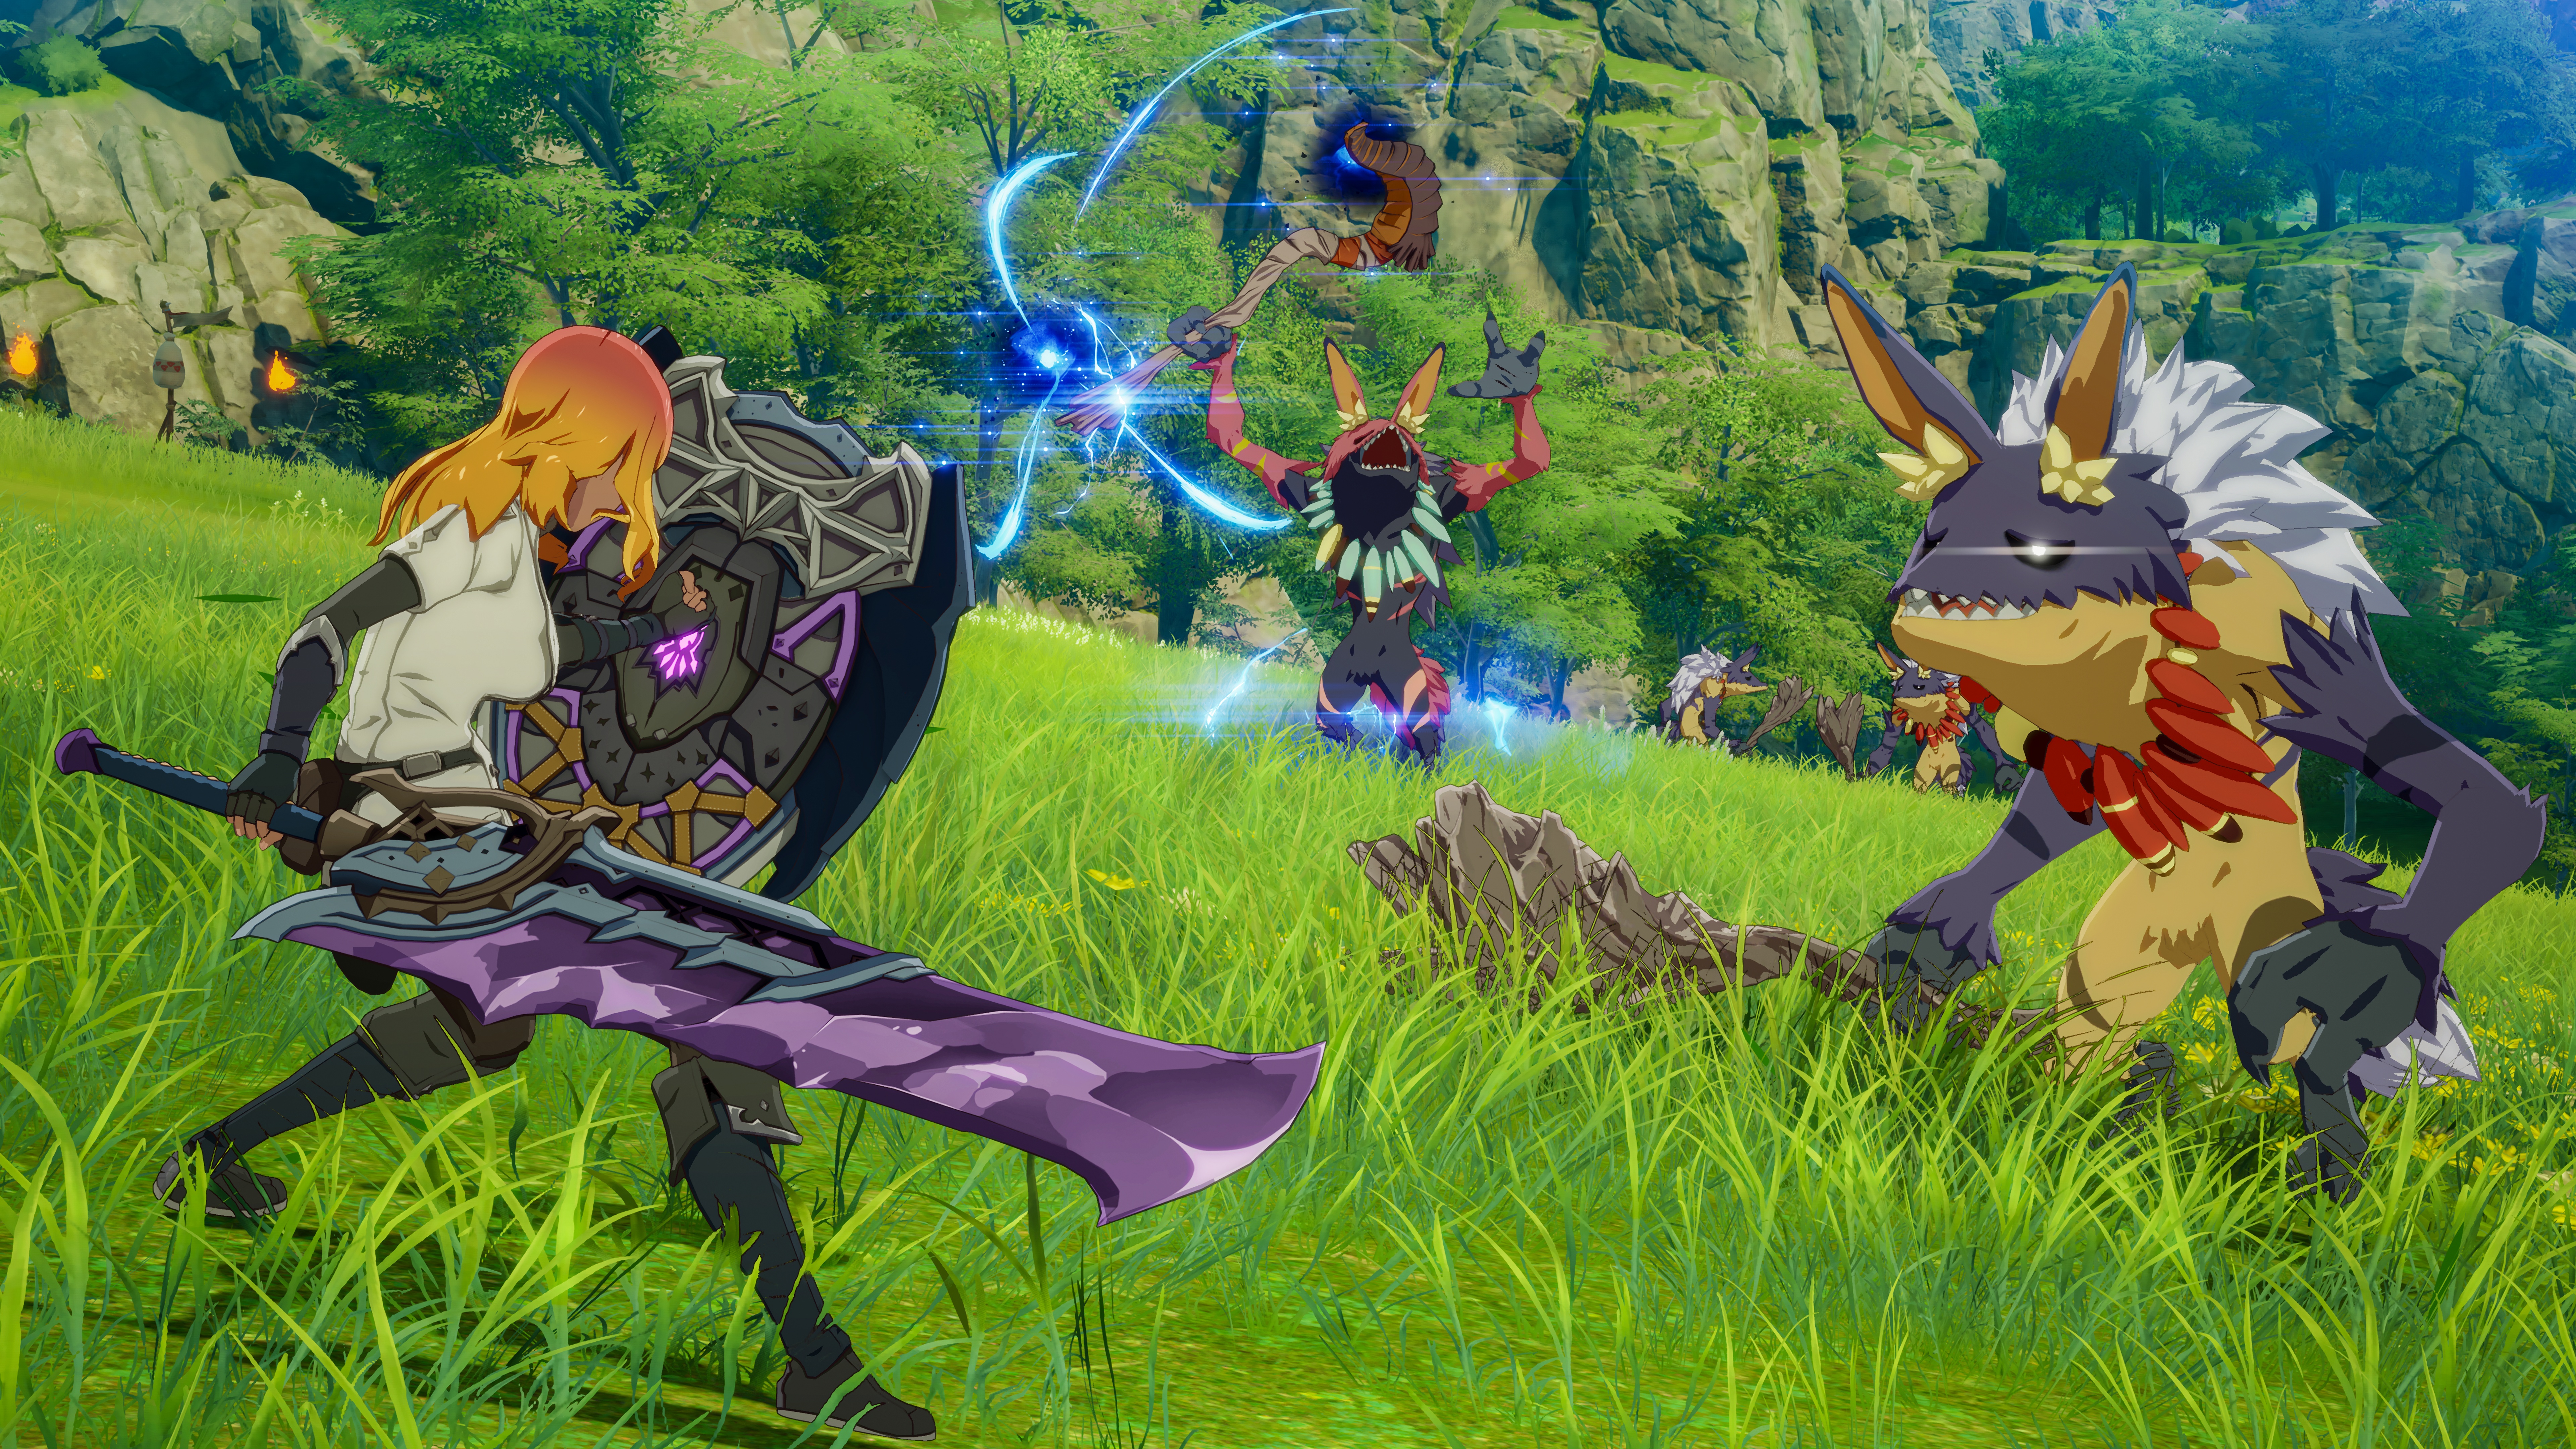 Blue Protocol Hands-on: Previewing Bandai Namco's upcoming RPG in